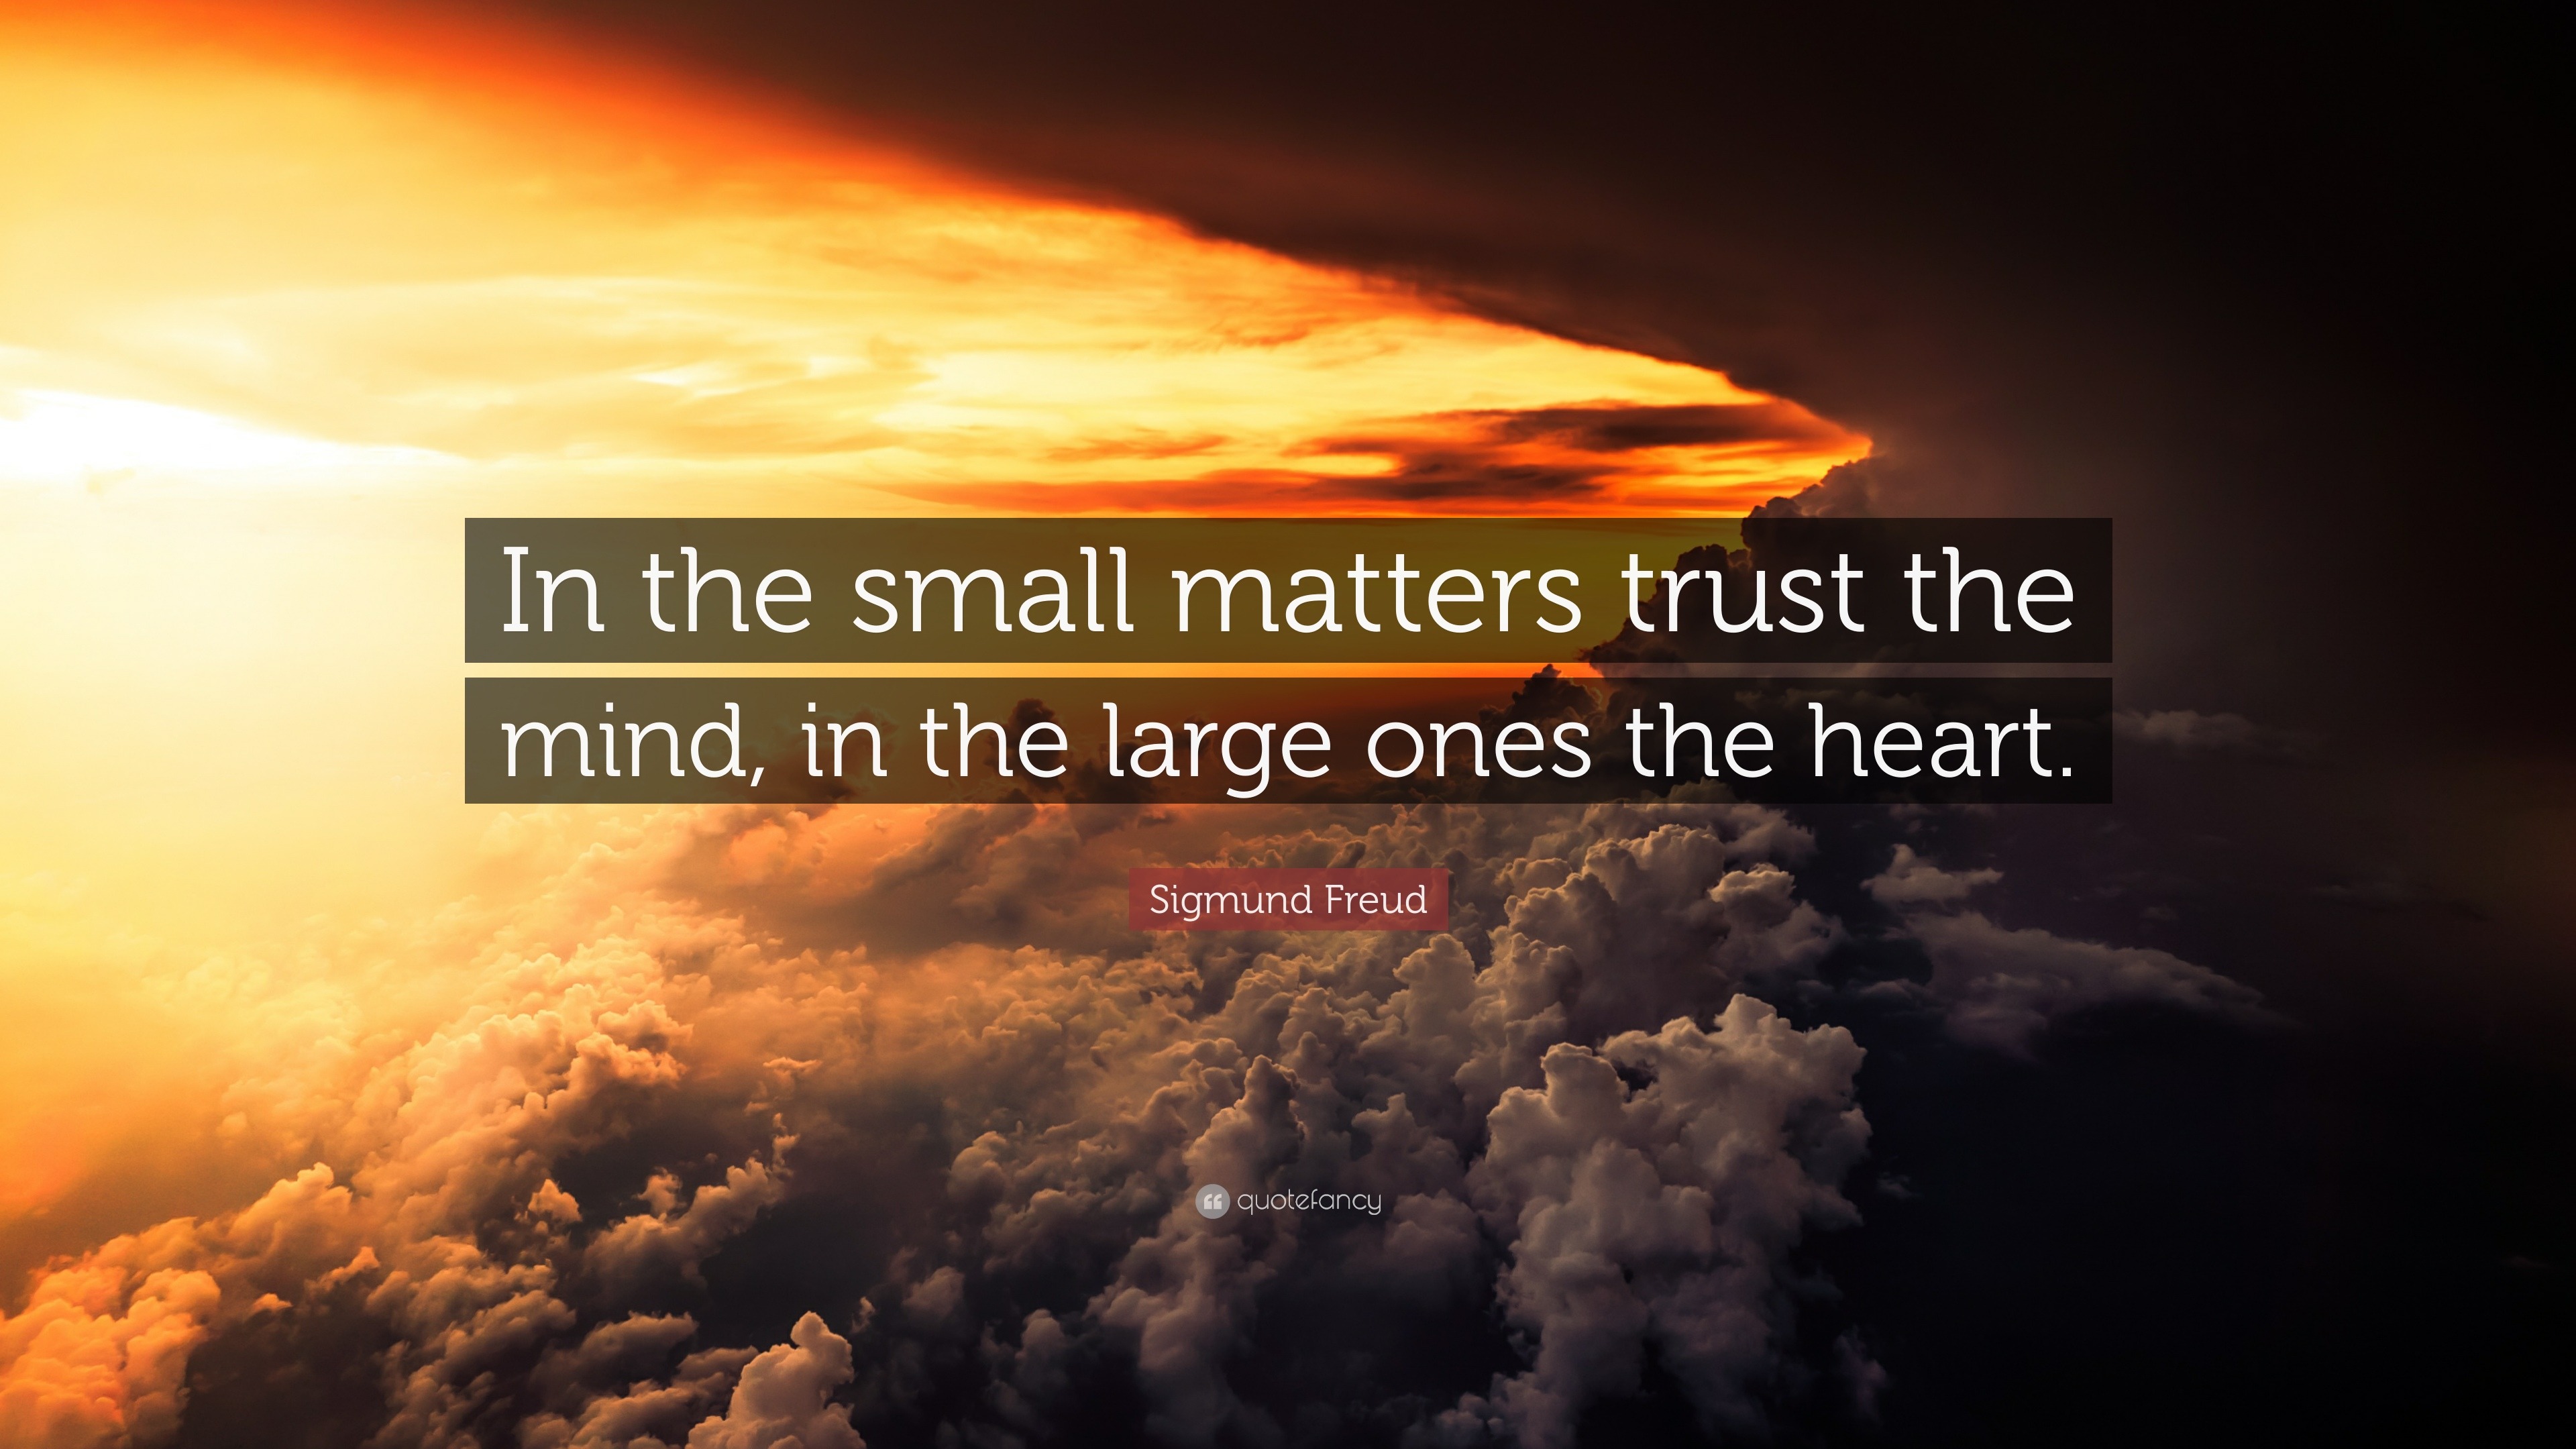 Sigmund Freud Quote: “In the small matters trust the mind, in the large